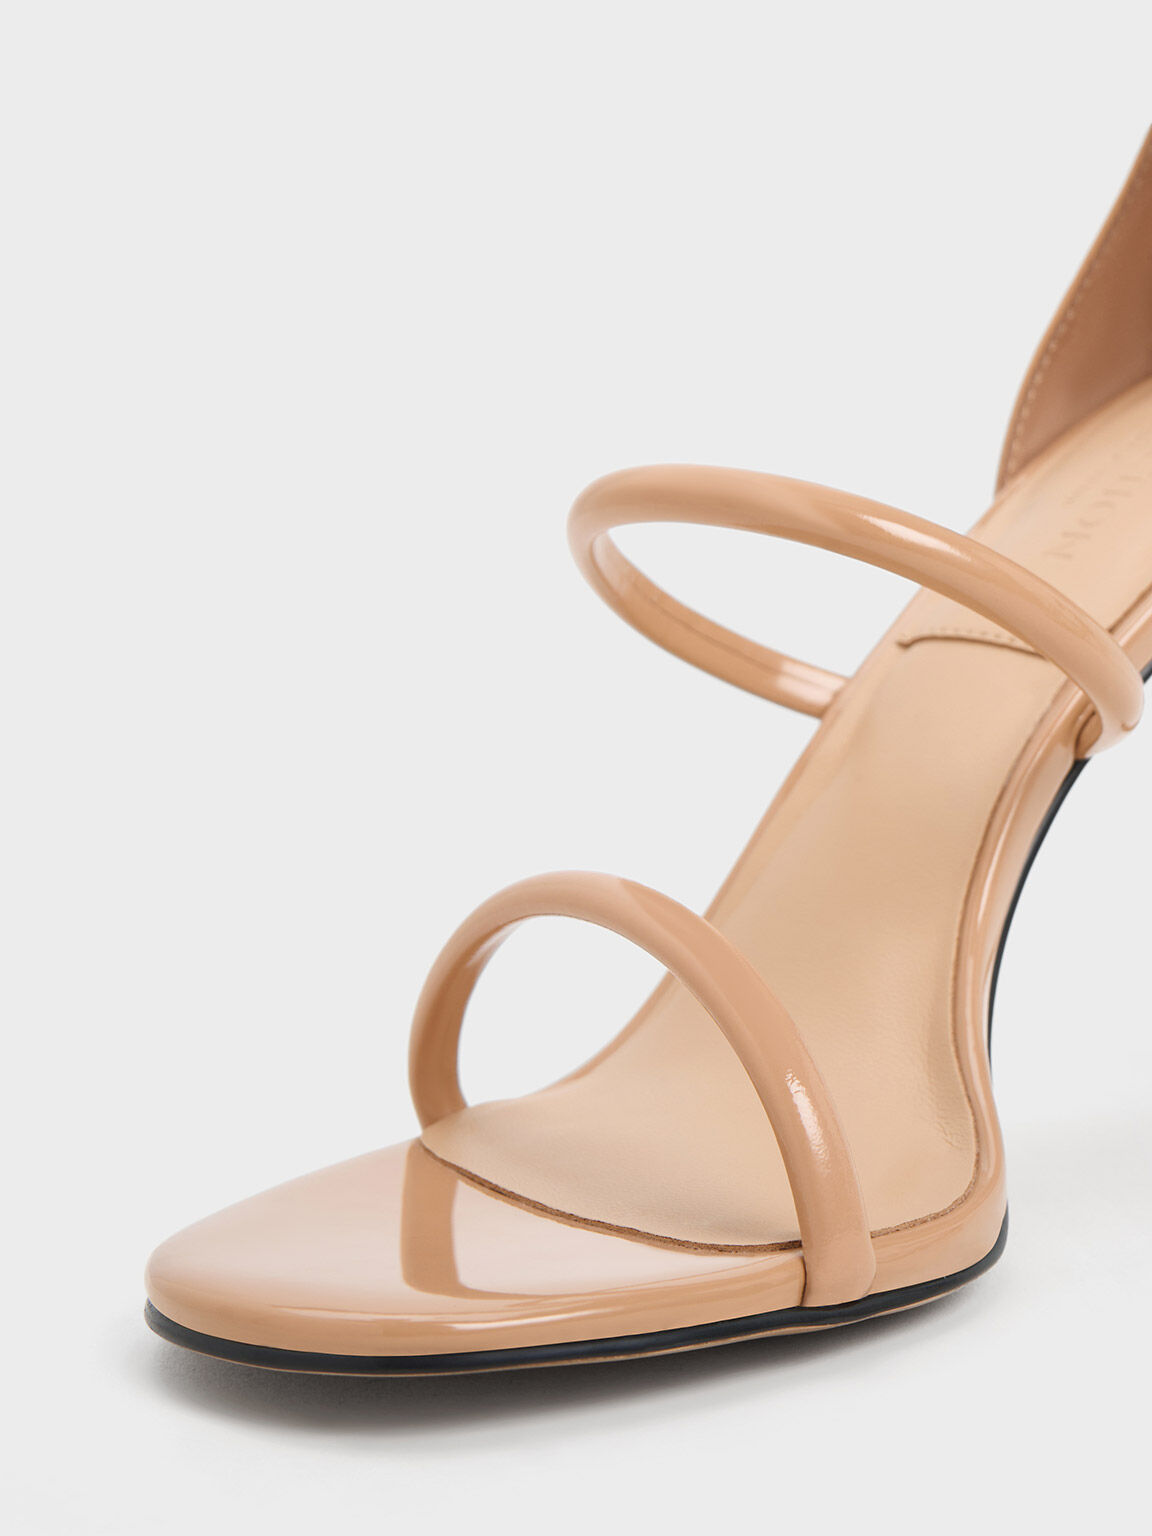 Nude Patent Leather Triple Strap Heeled Sandals - CHARLES & KEITH NL